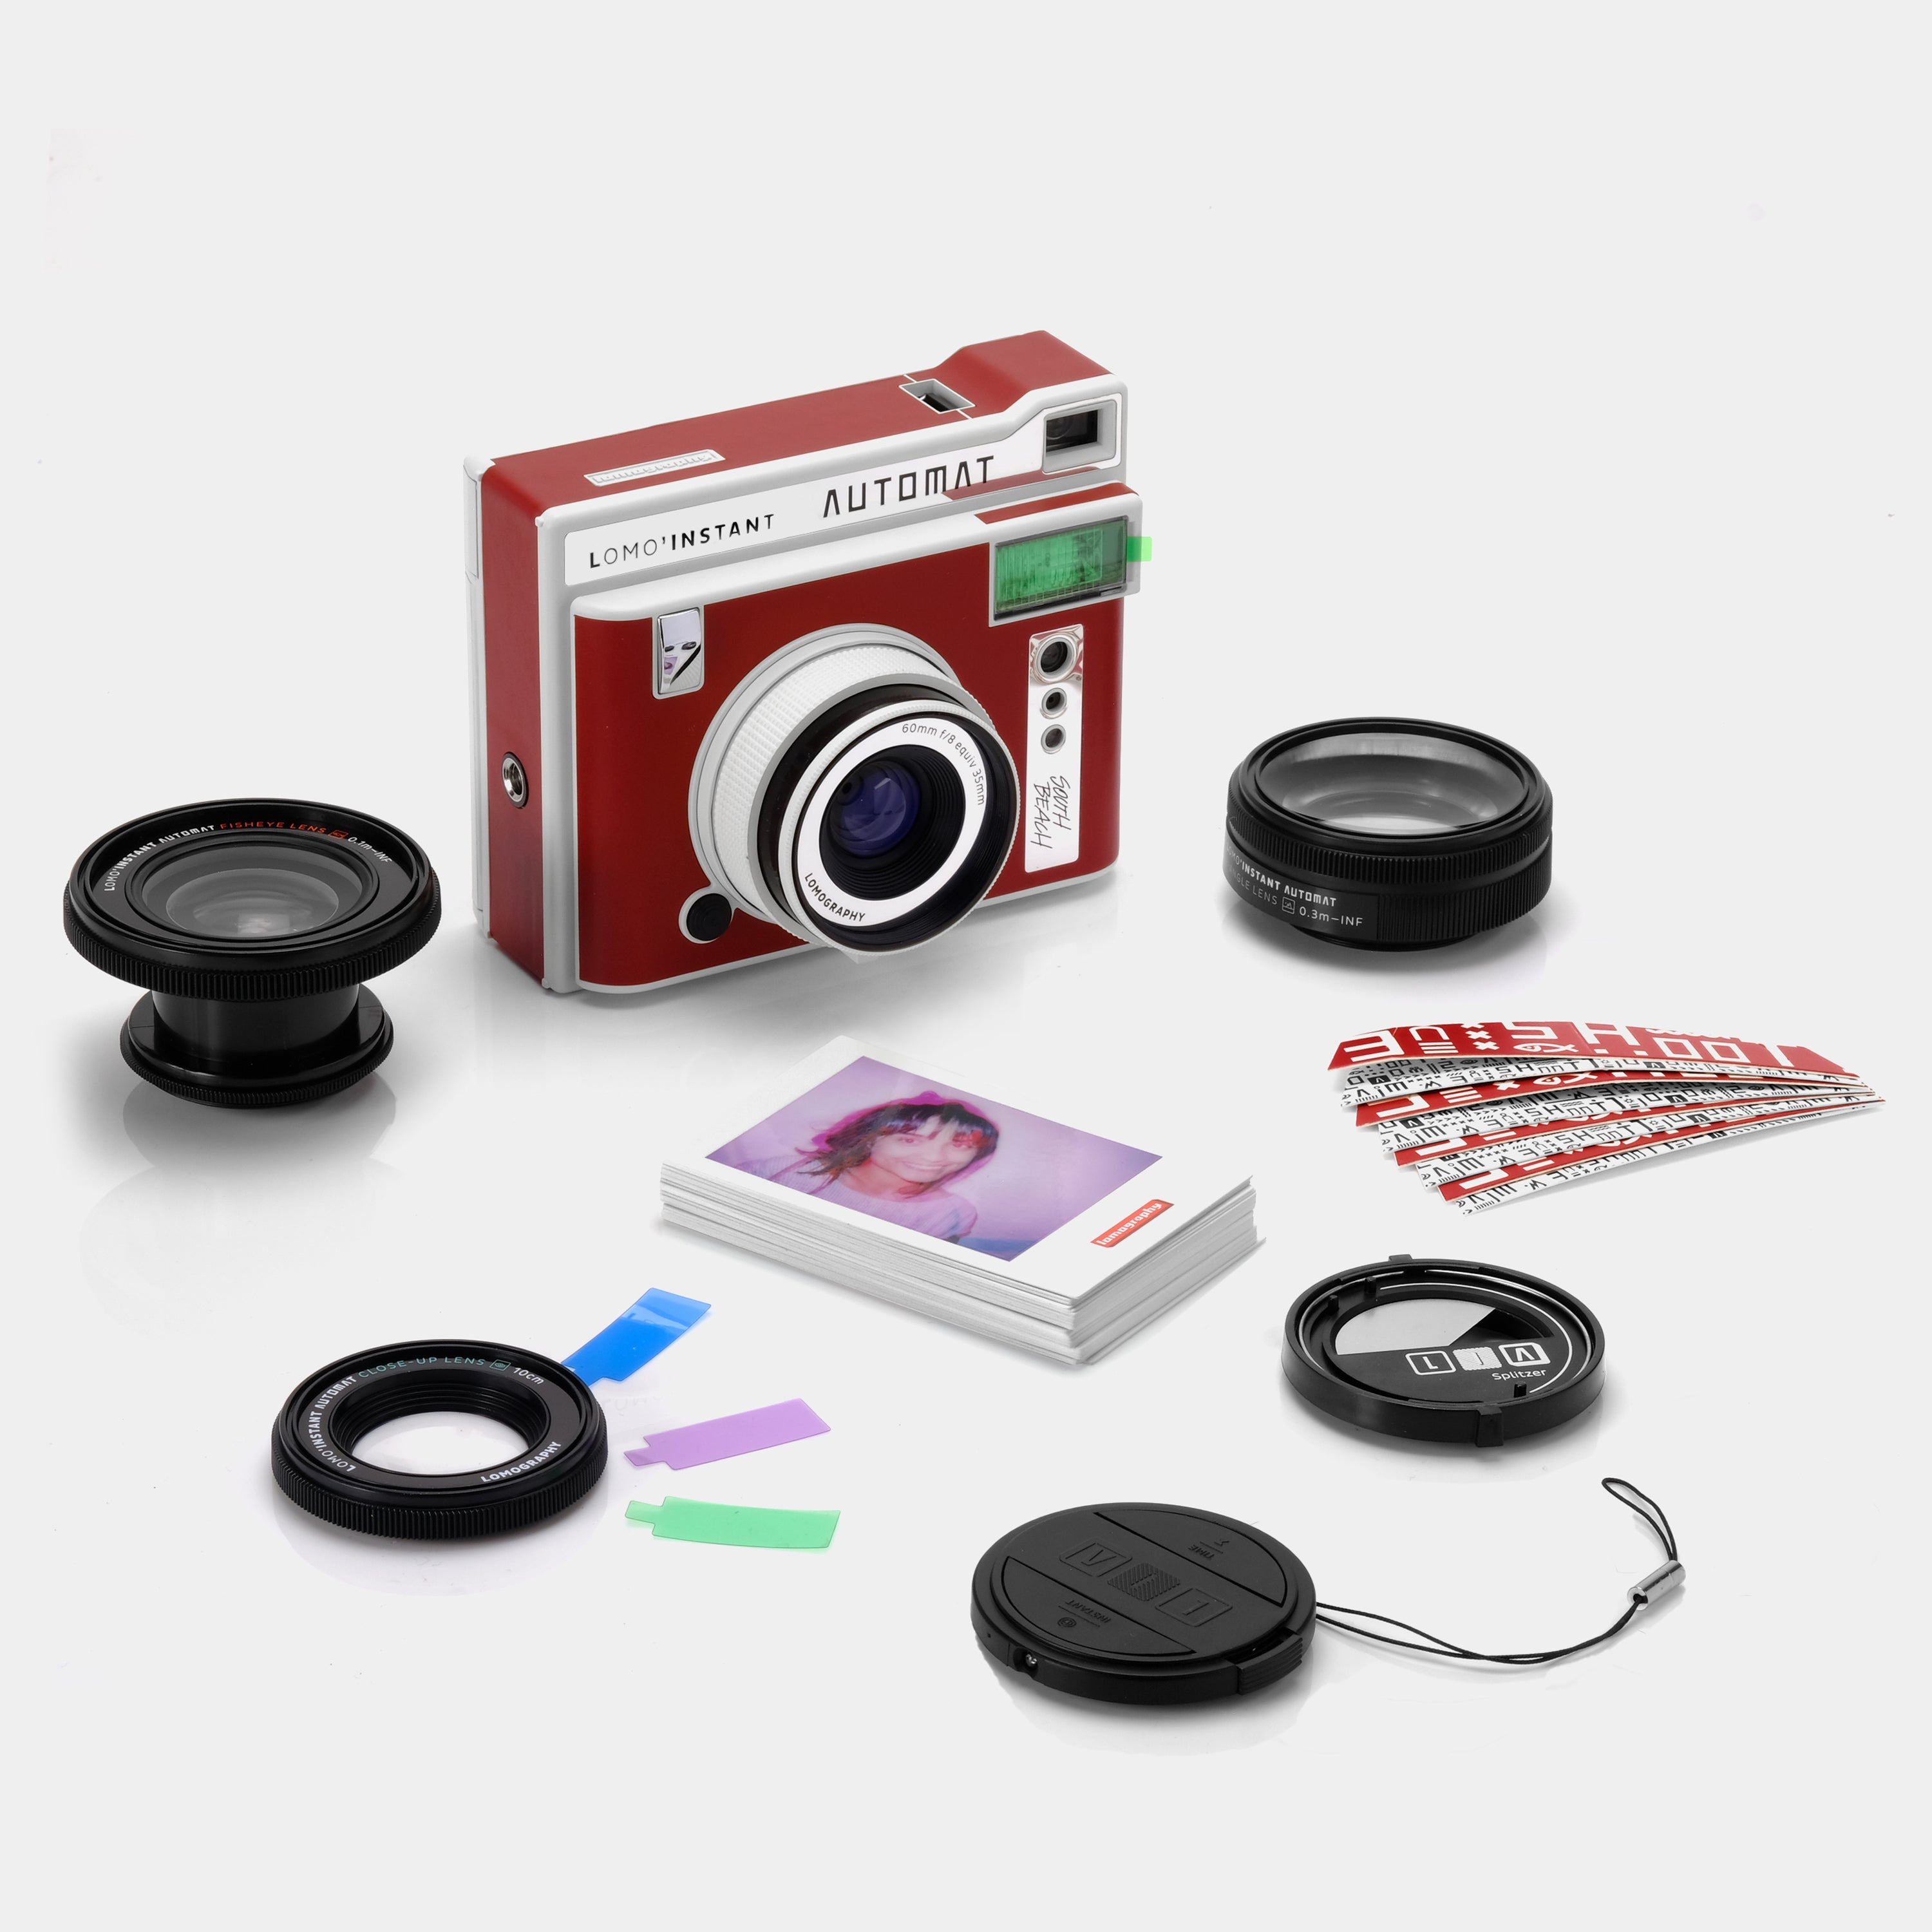 Lomography Lomo'Instant Automat (South Beach Edition) and Lenses Instax Mini Instant Film Camera